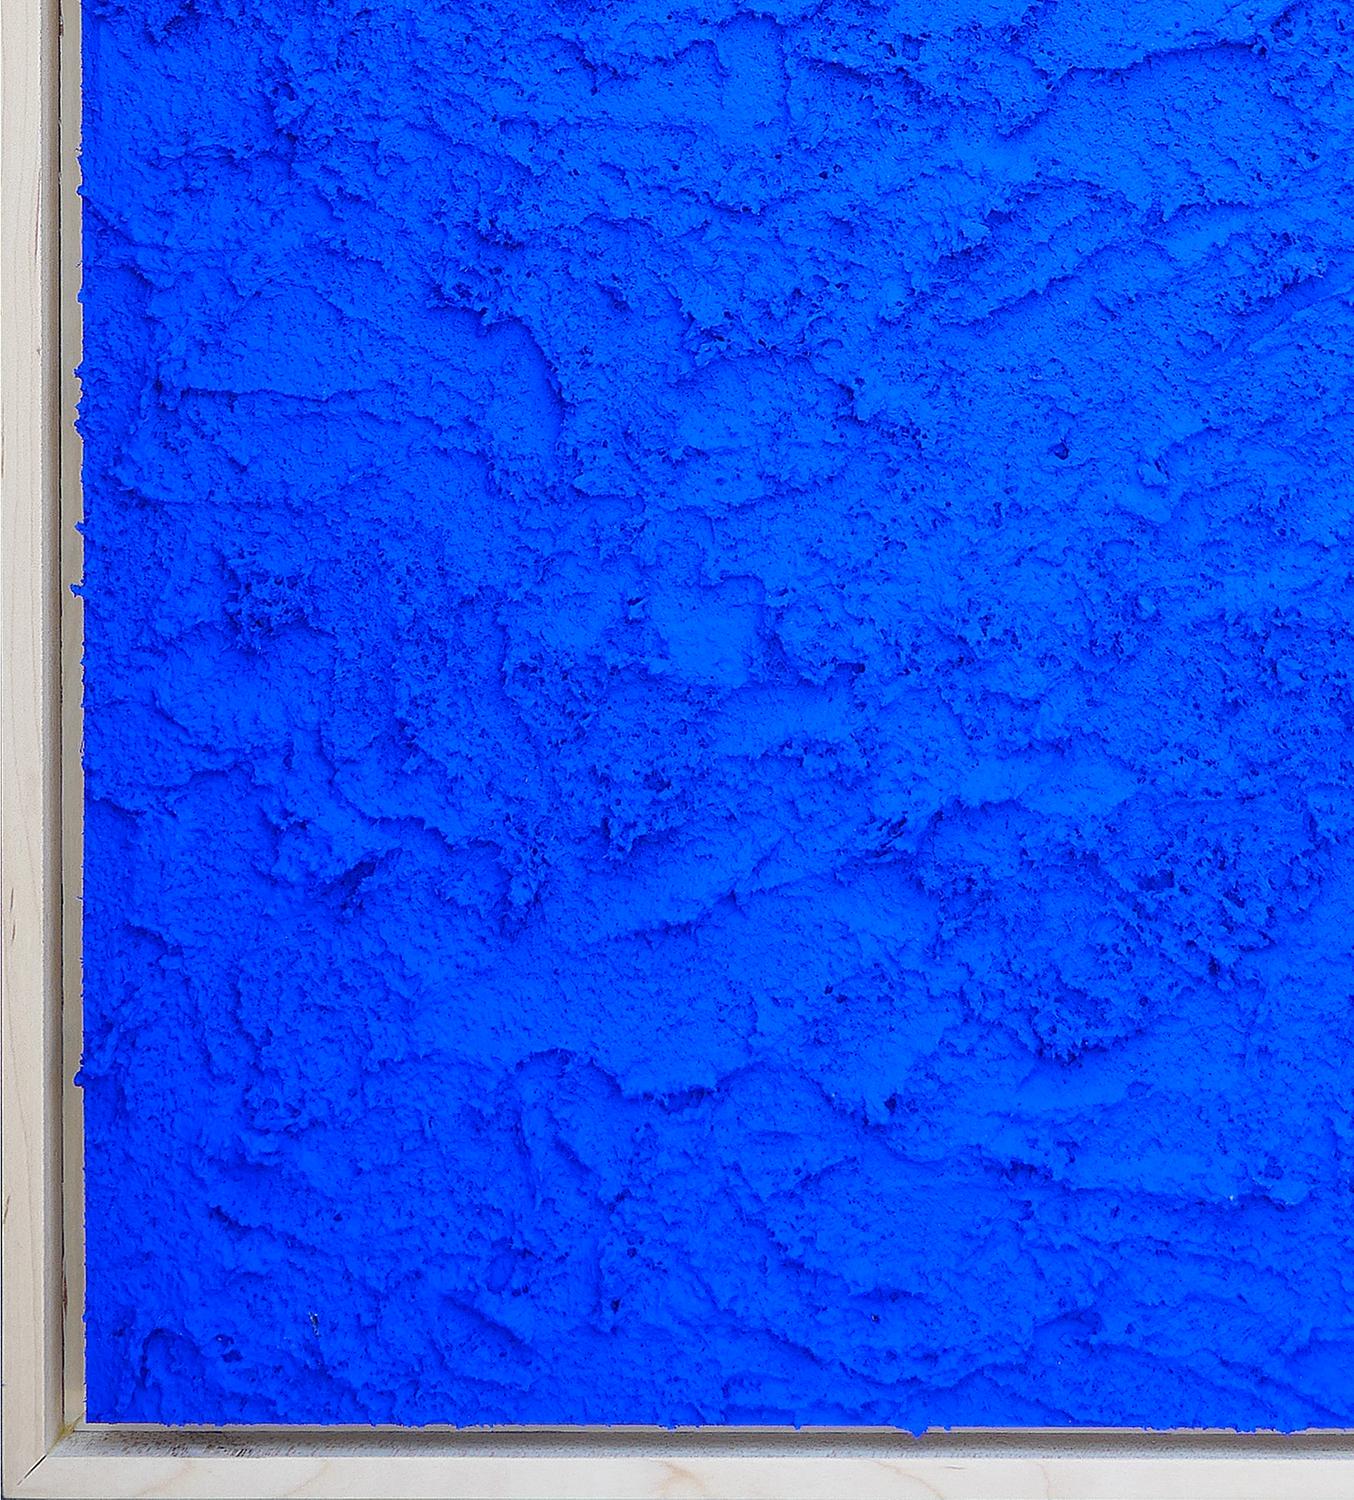 Abstract textured composition painted with bright blue pigment by contemporary Houston, TX artist Matthew Reeves. The dynamic texture combined with the intensity of the blue creates a lively energy. The uniqueness of this blue does not derive from